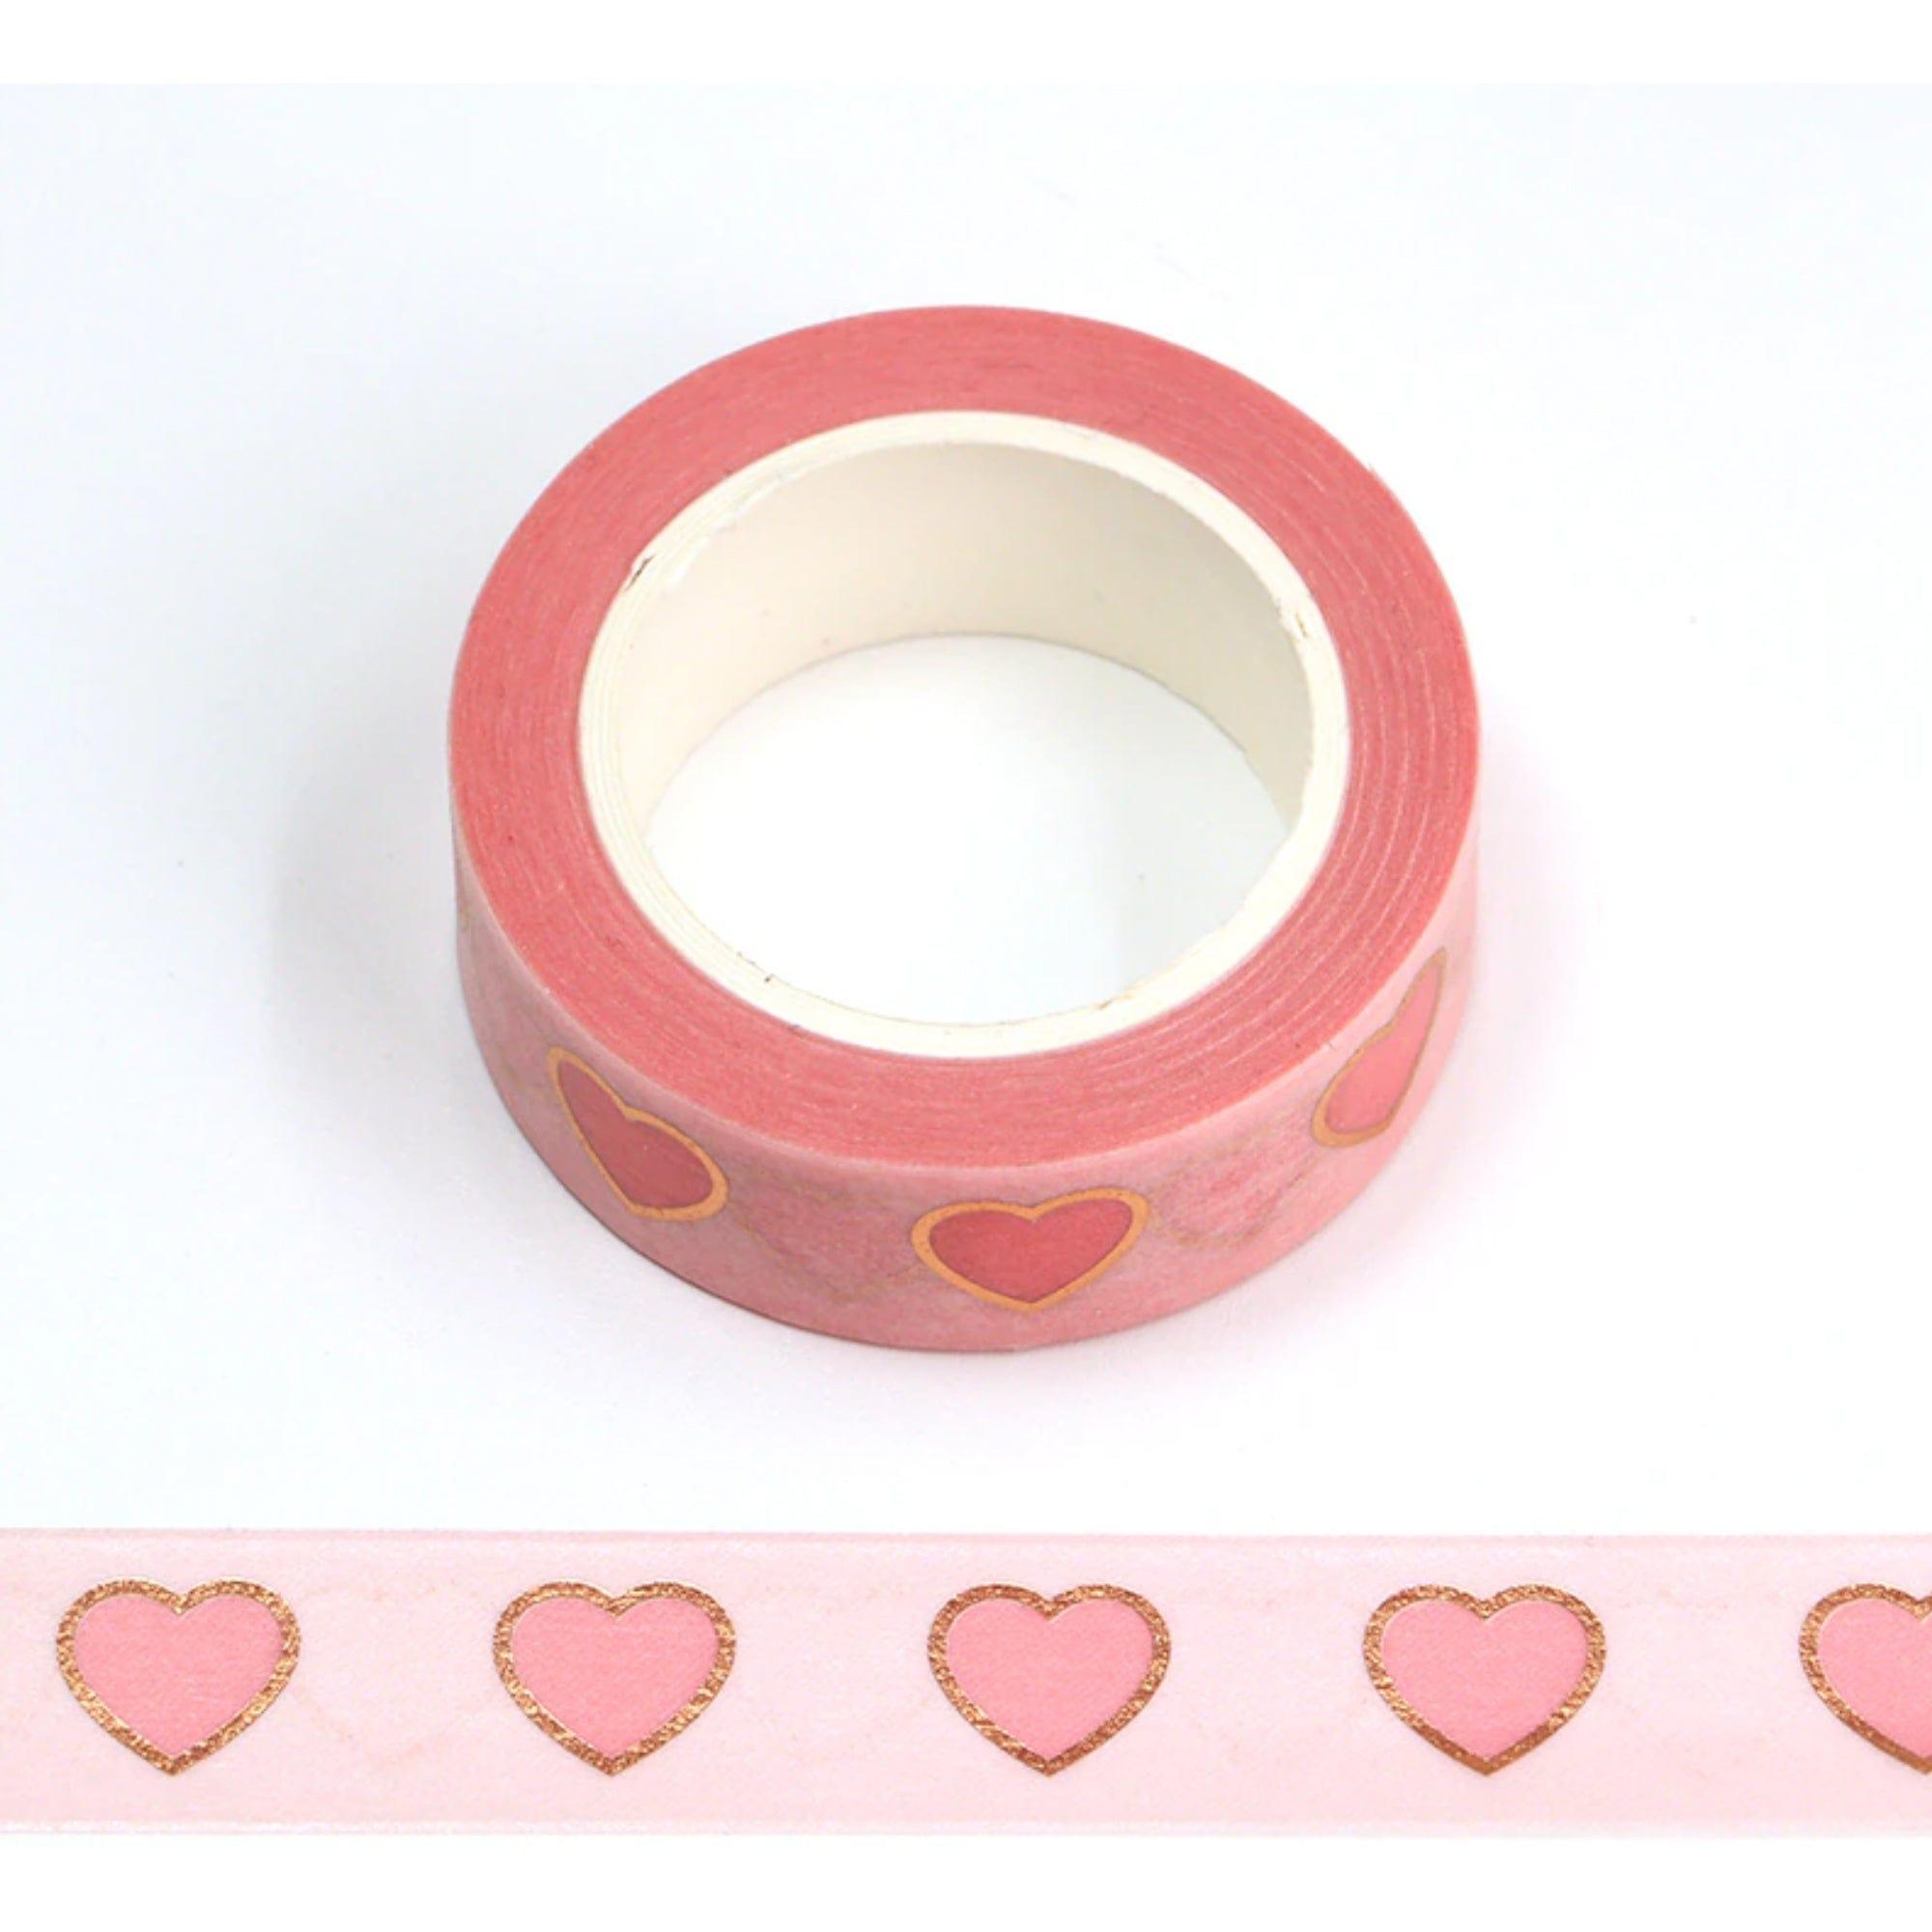 SSC Designs | Pink Hearts Gold Foiled Scrapbook Washi Tape